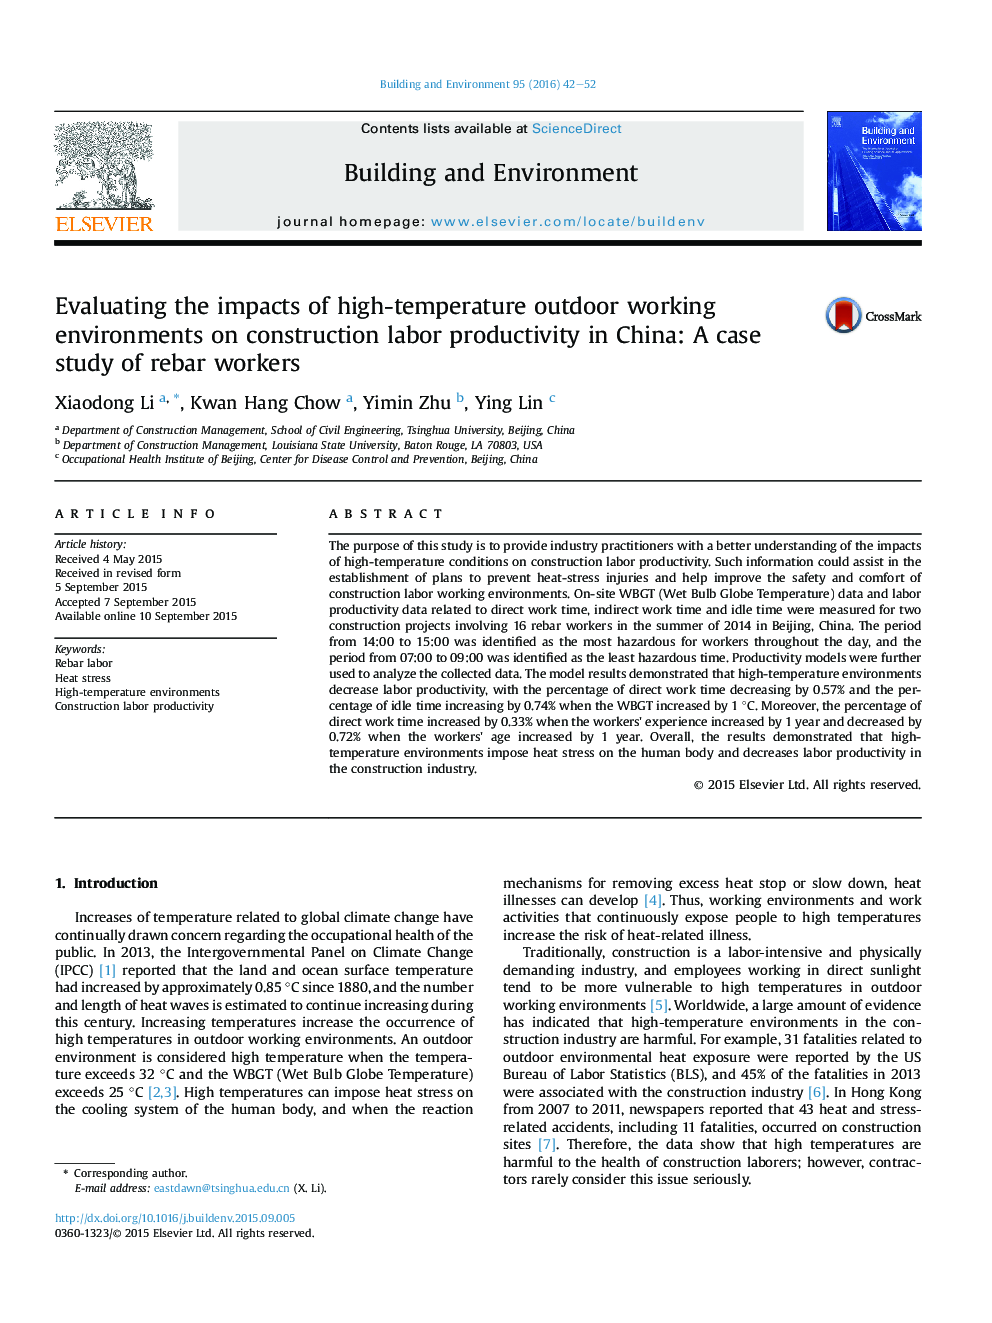 Evaluating the impacts of high-temperature outdoor working environments on construction labor productivity in China: A case study of rebar workers